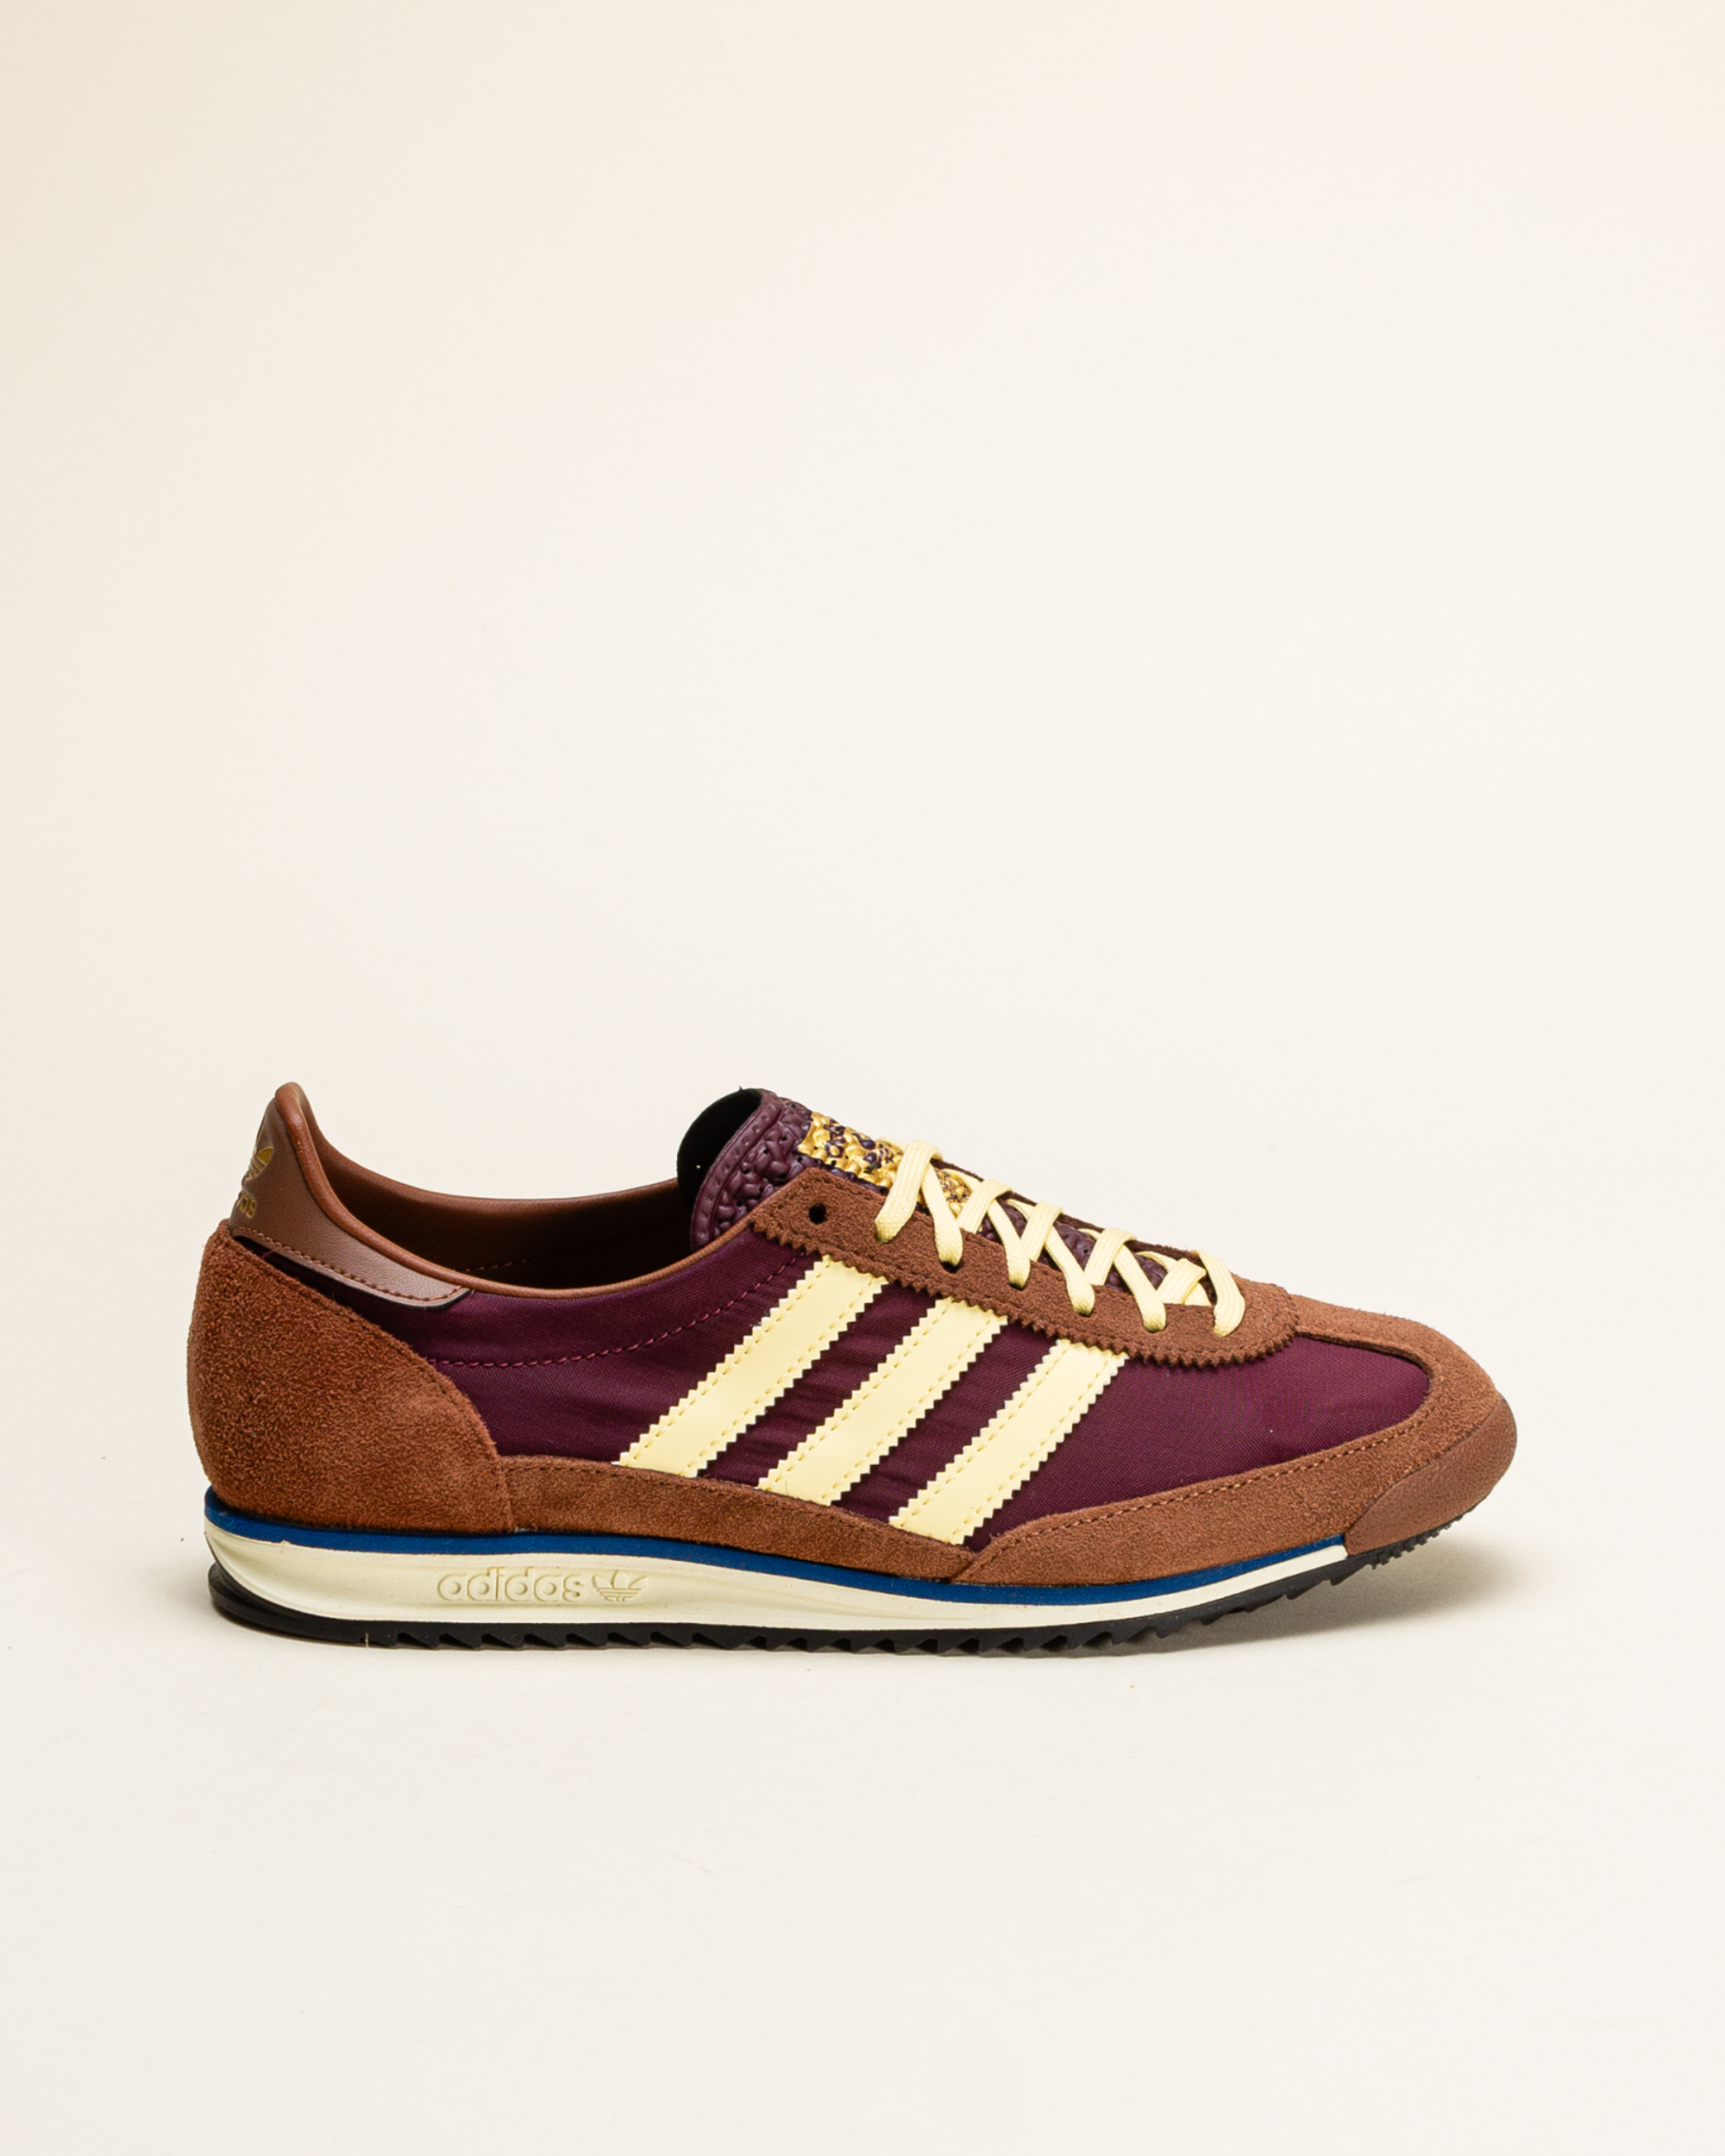 Adidas SL 72 OG W - Maroon / Almost Yellow / Preloved Brown